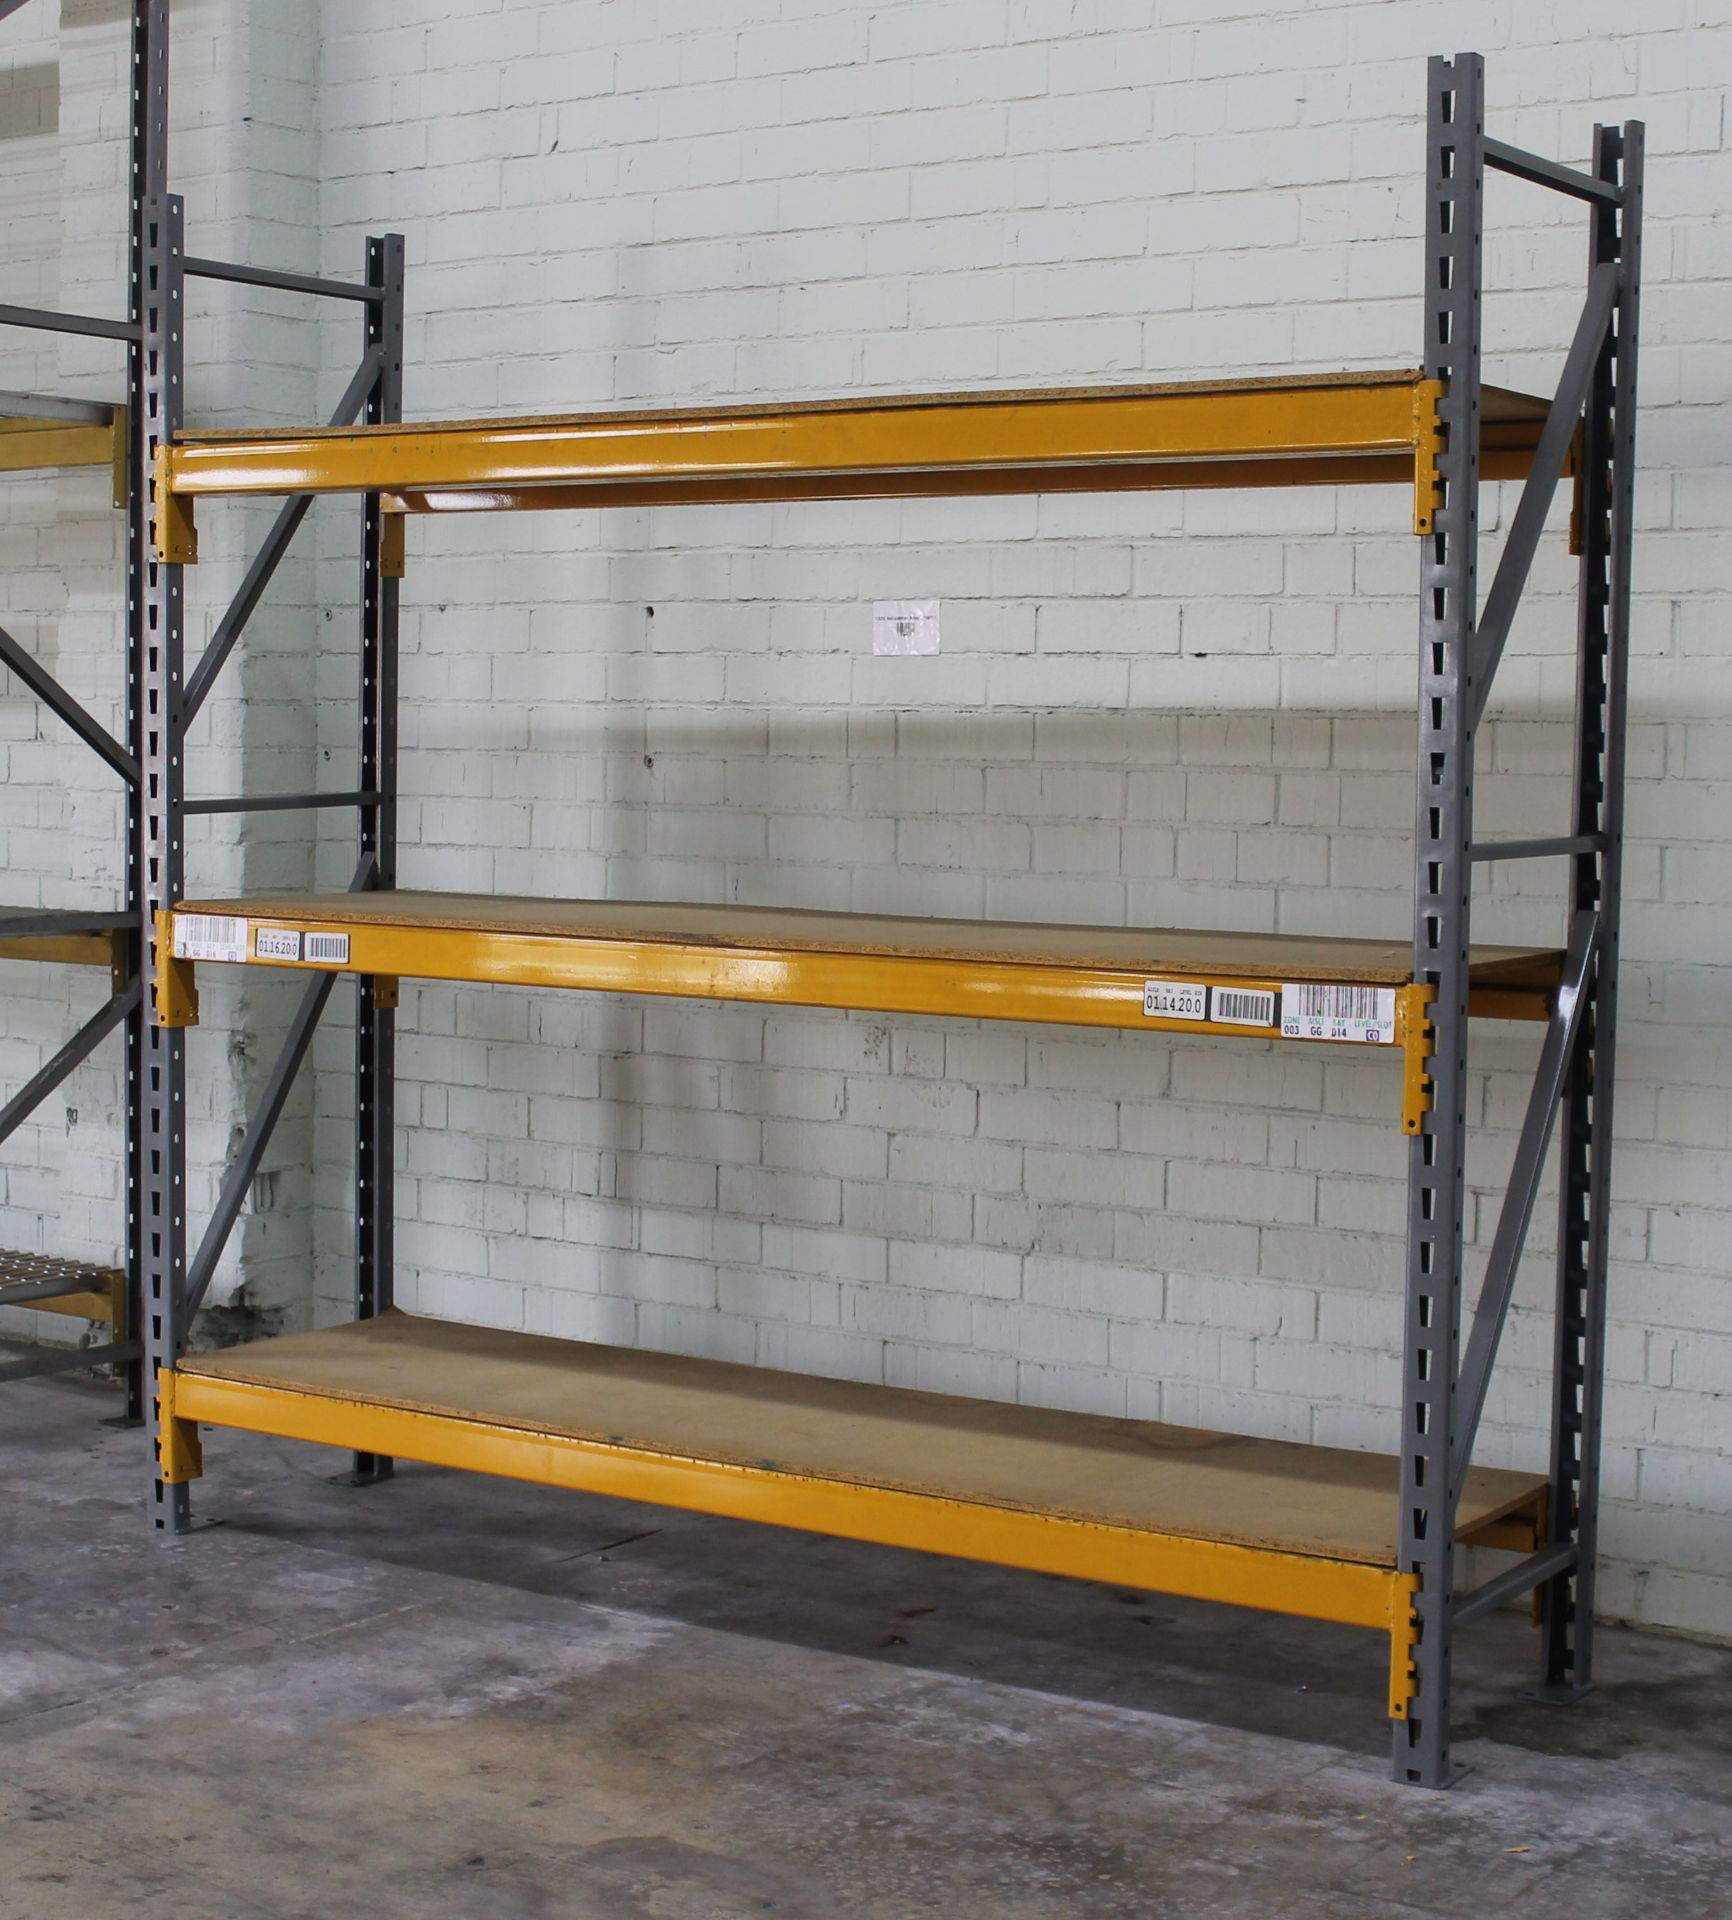 10 SECTIONS OF 96"H X 24"D X 96"L STOCK ROOM PALLET RACK SHELVING